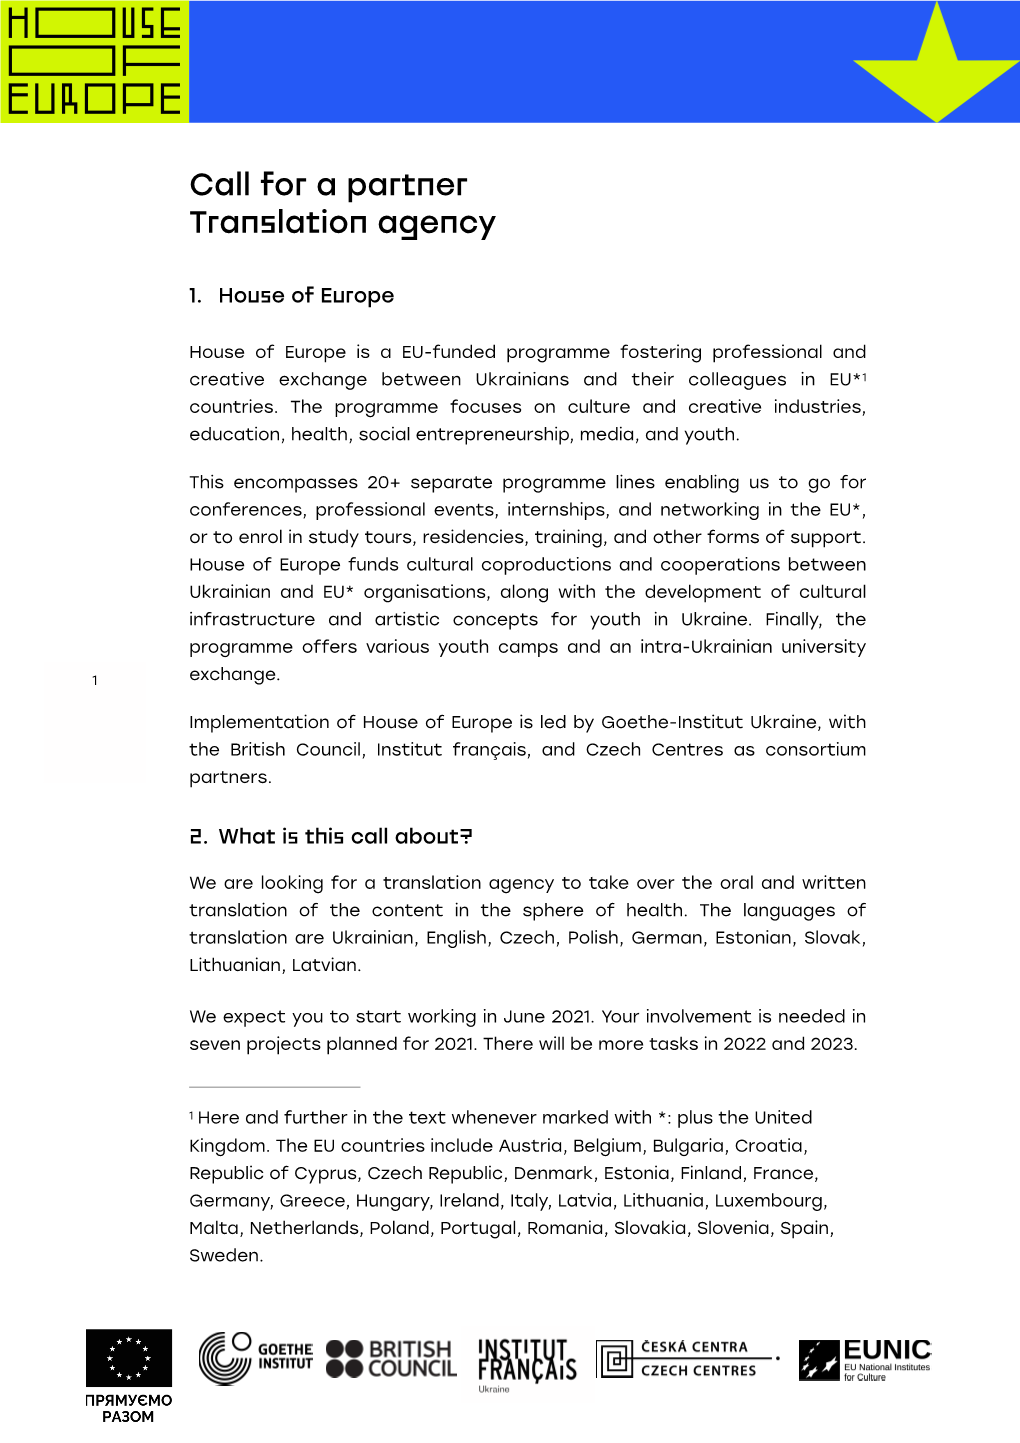 Call for a Translation Agency